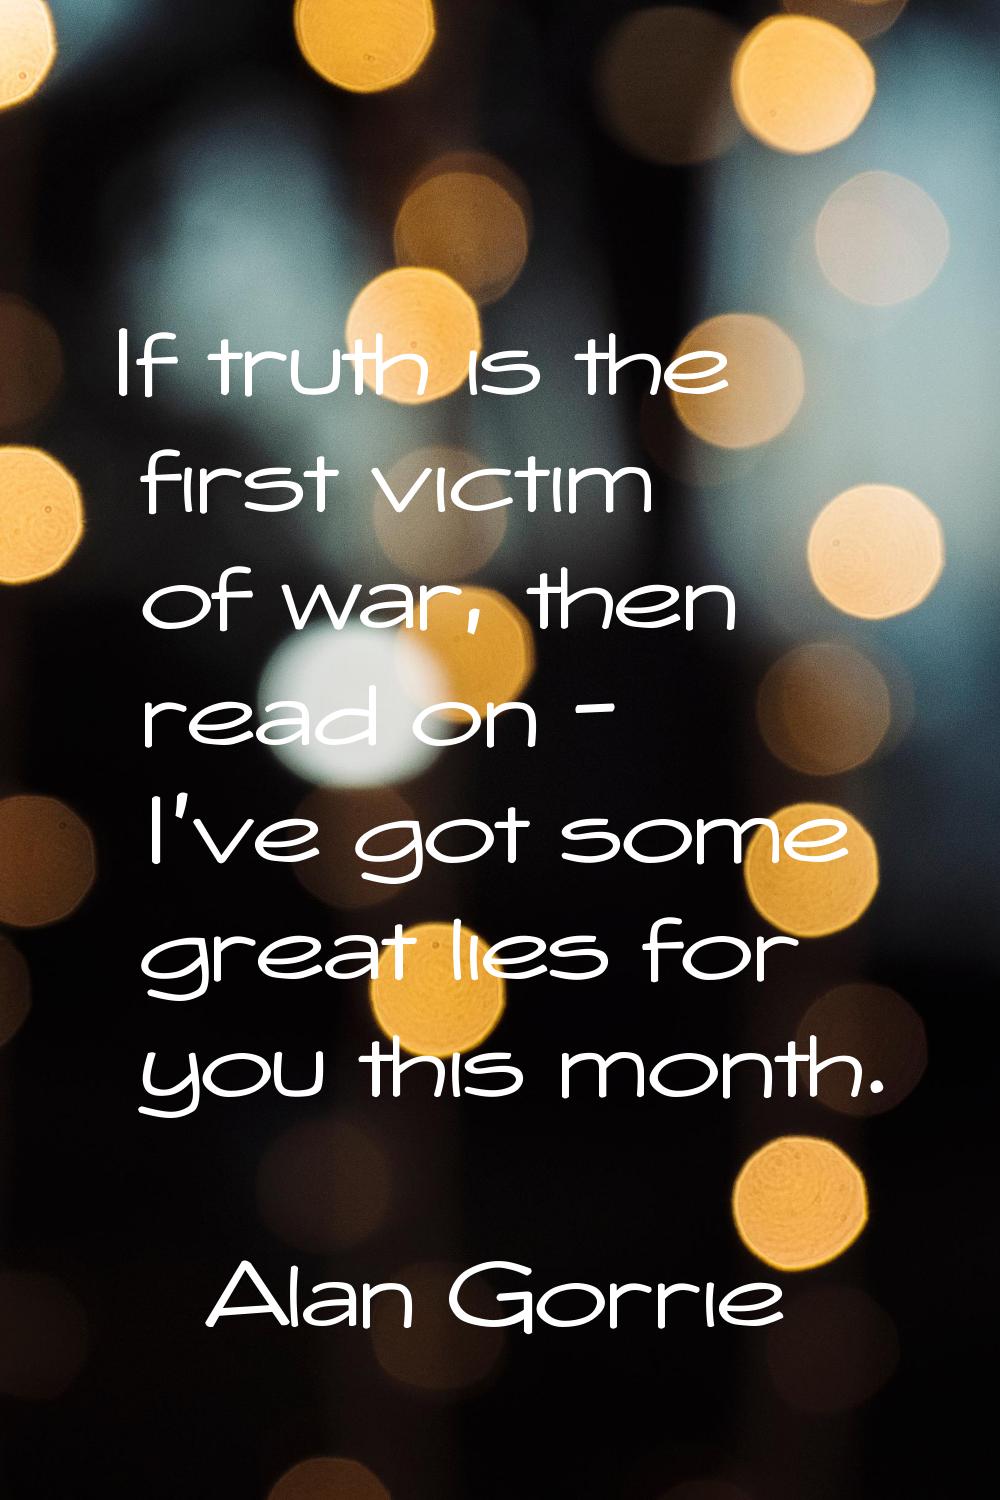 If truth is the first victim of war, then read on - I've got some great lies for you this month.